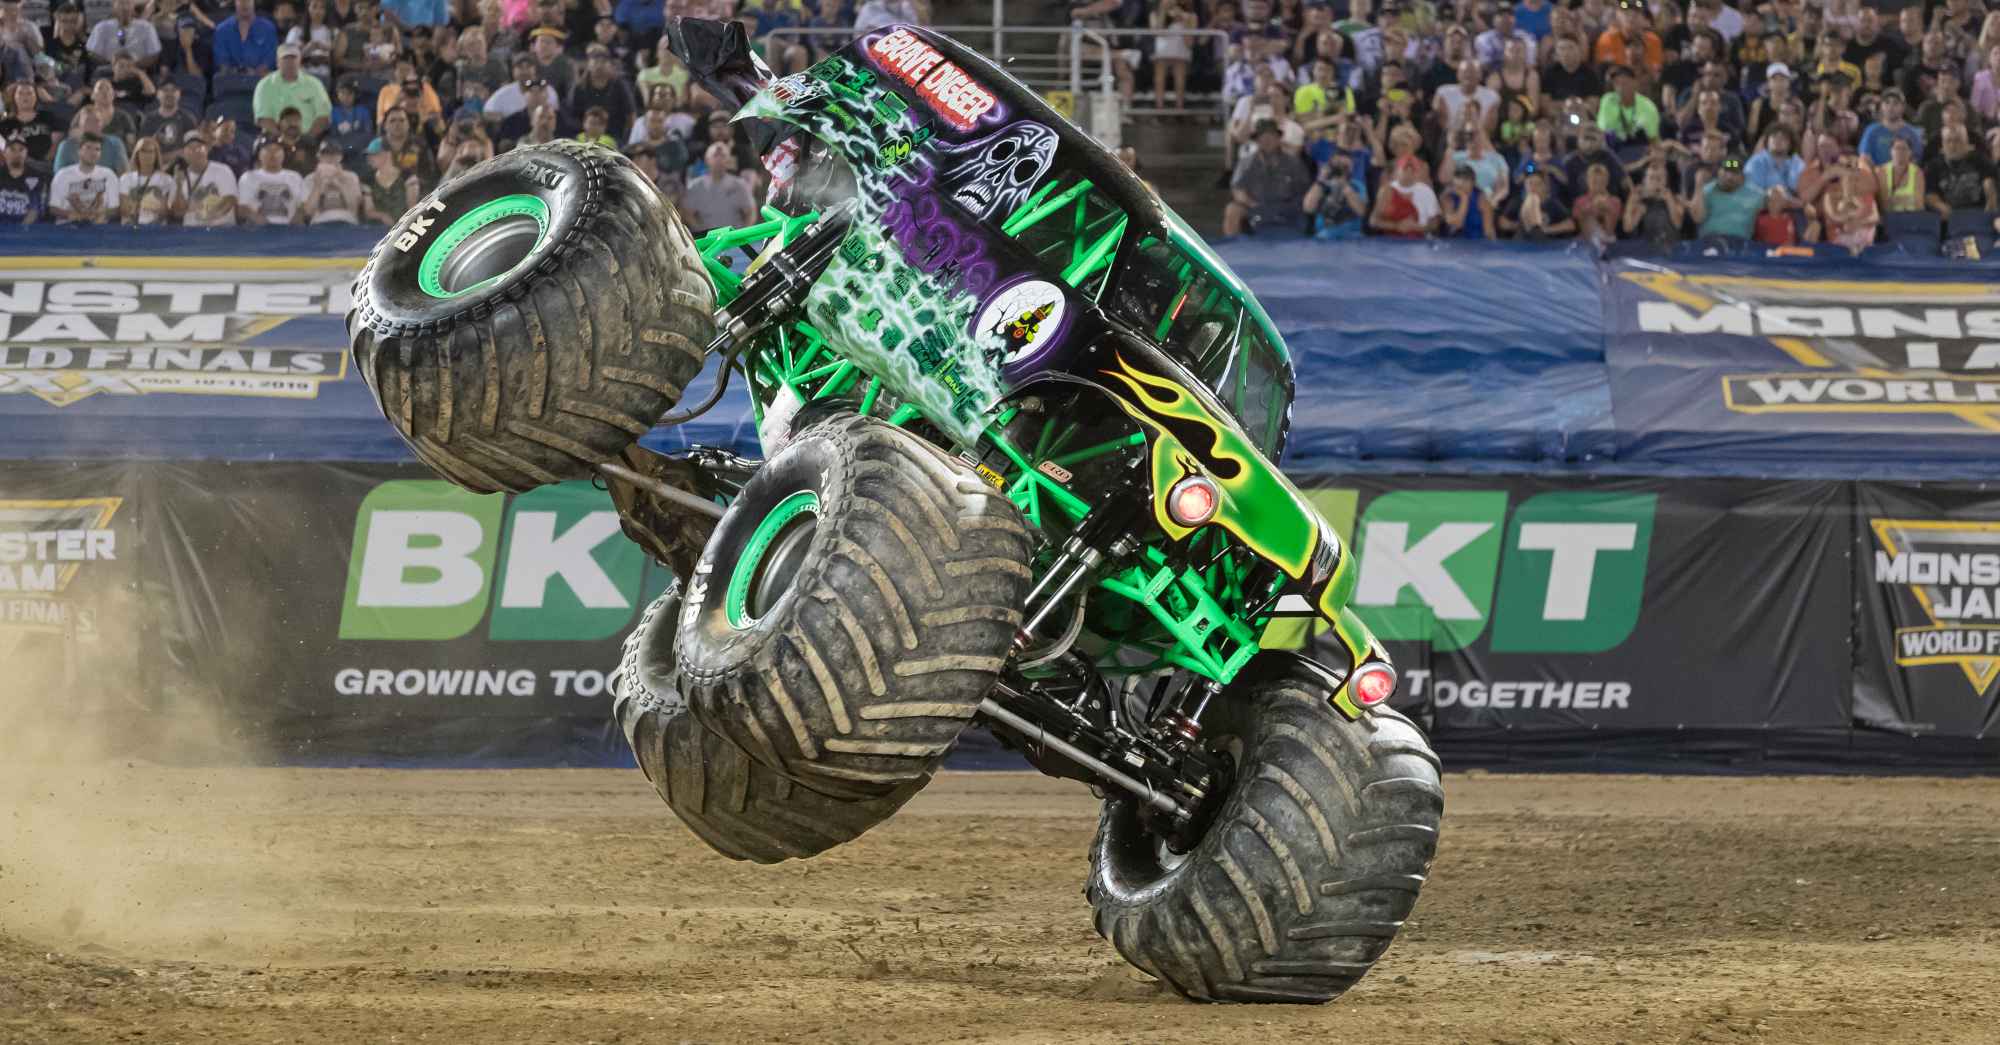 Grave Digger with BKT sponsorship in the background